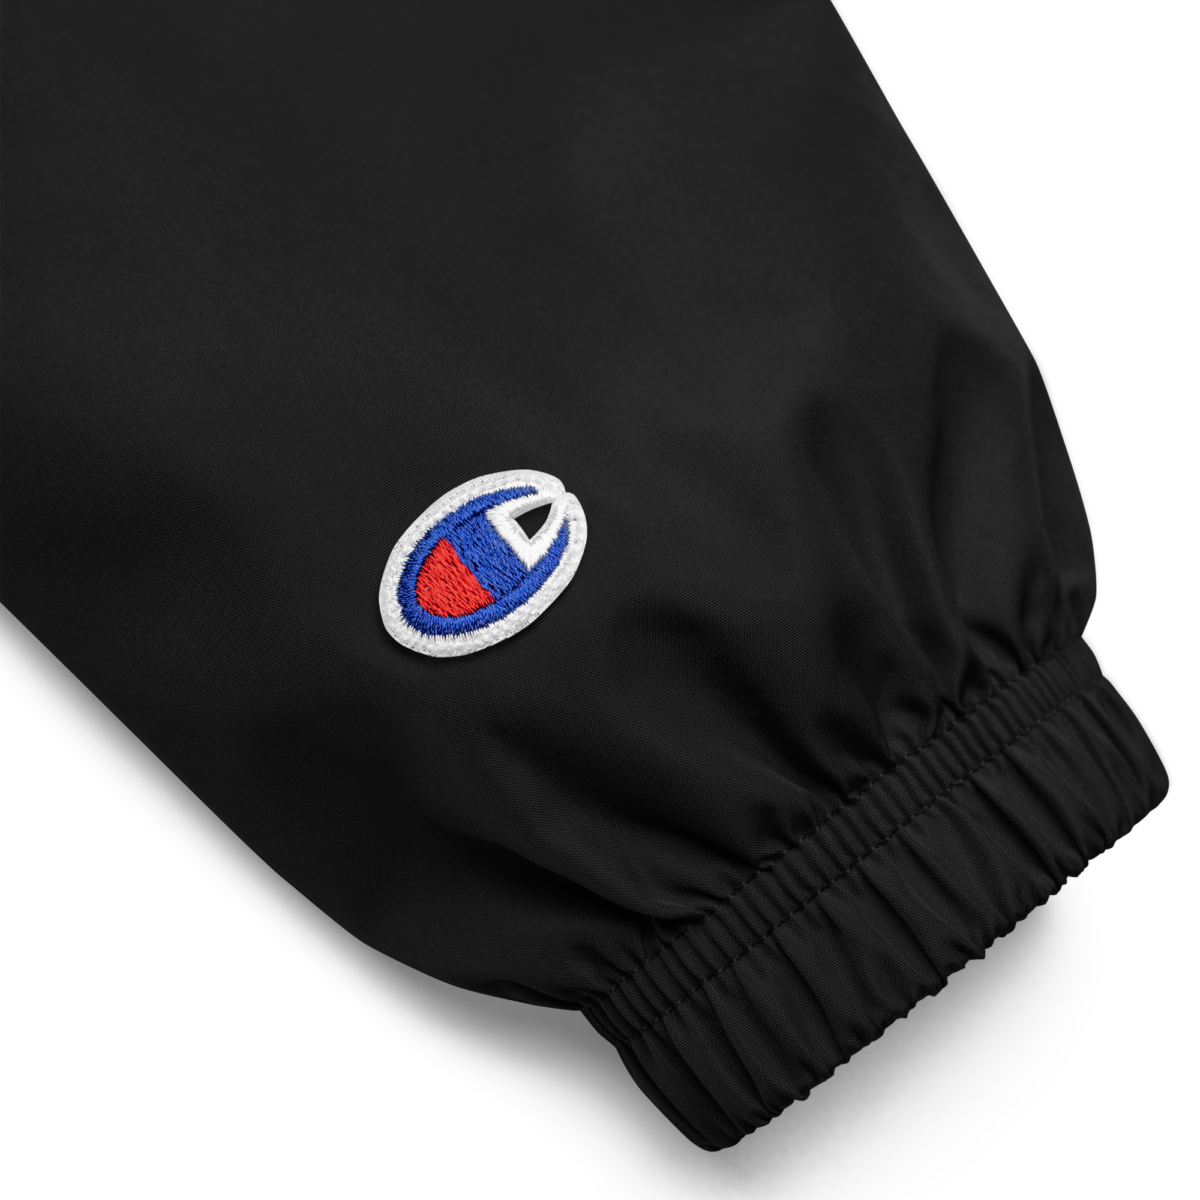 embroidered champion packable jacket black product details 631f3e8e4acf4 - Tron Champion Packable Jacket